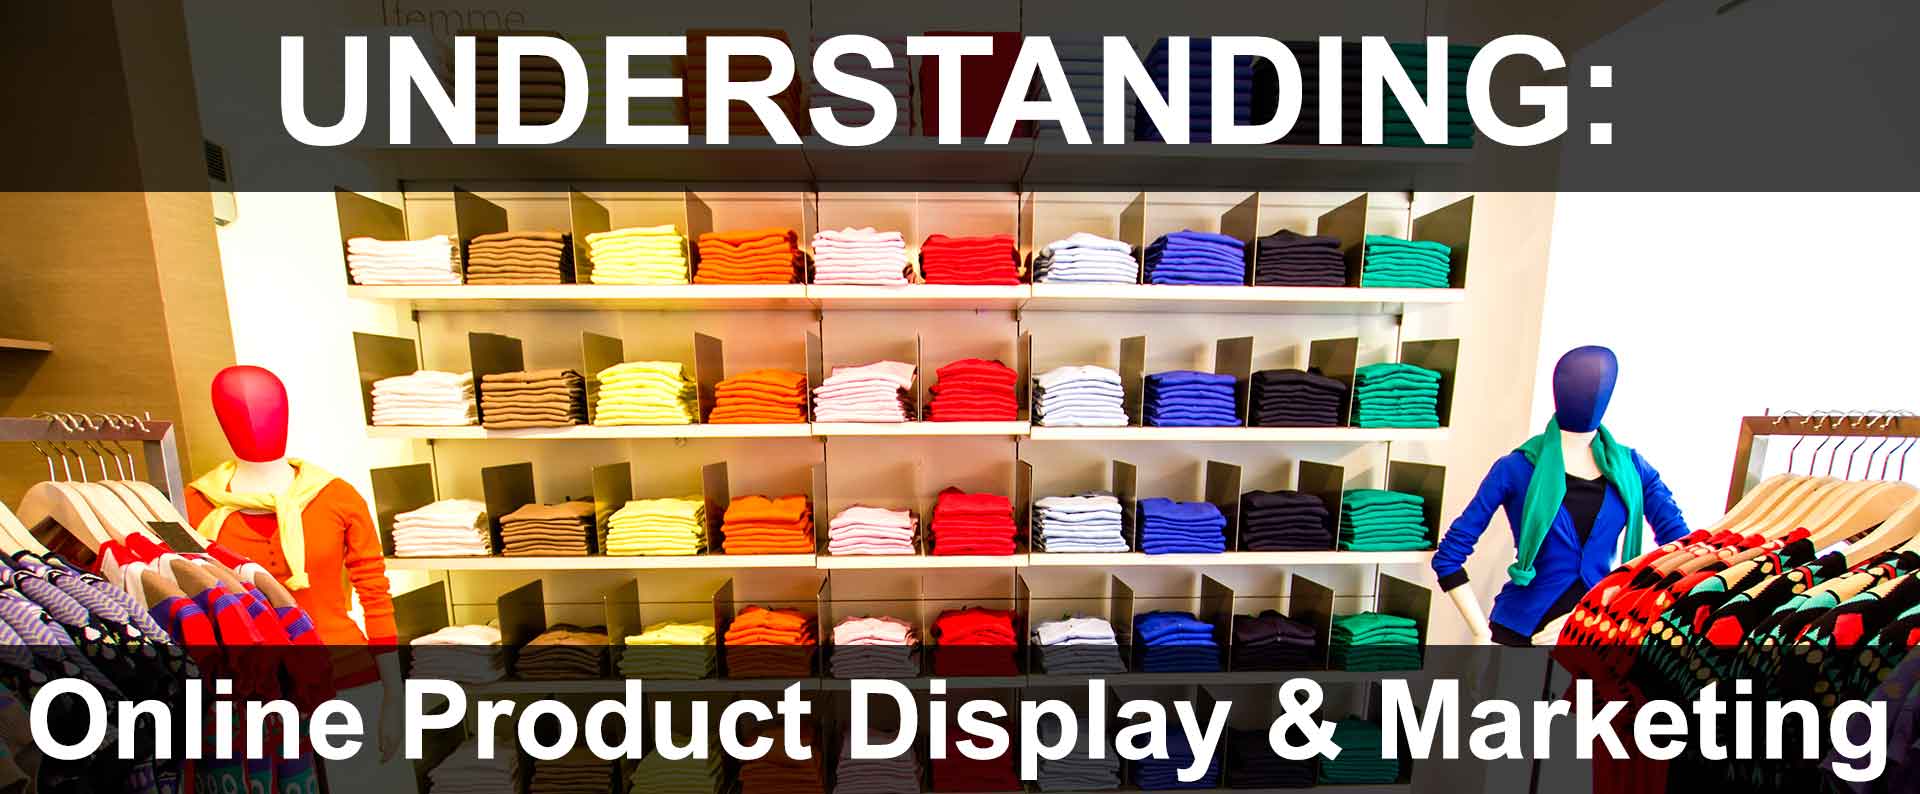 Website Content Must Be Merchandised Just Like Products In-Store